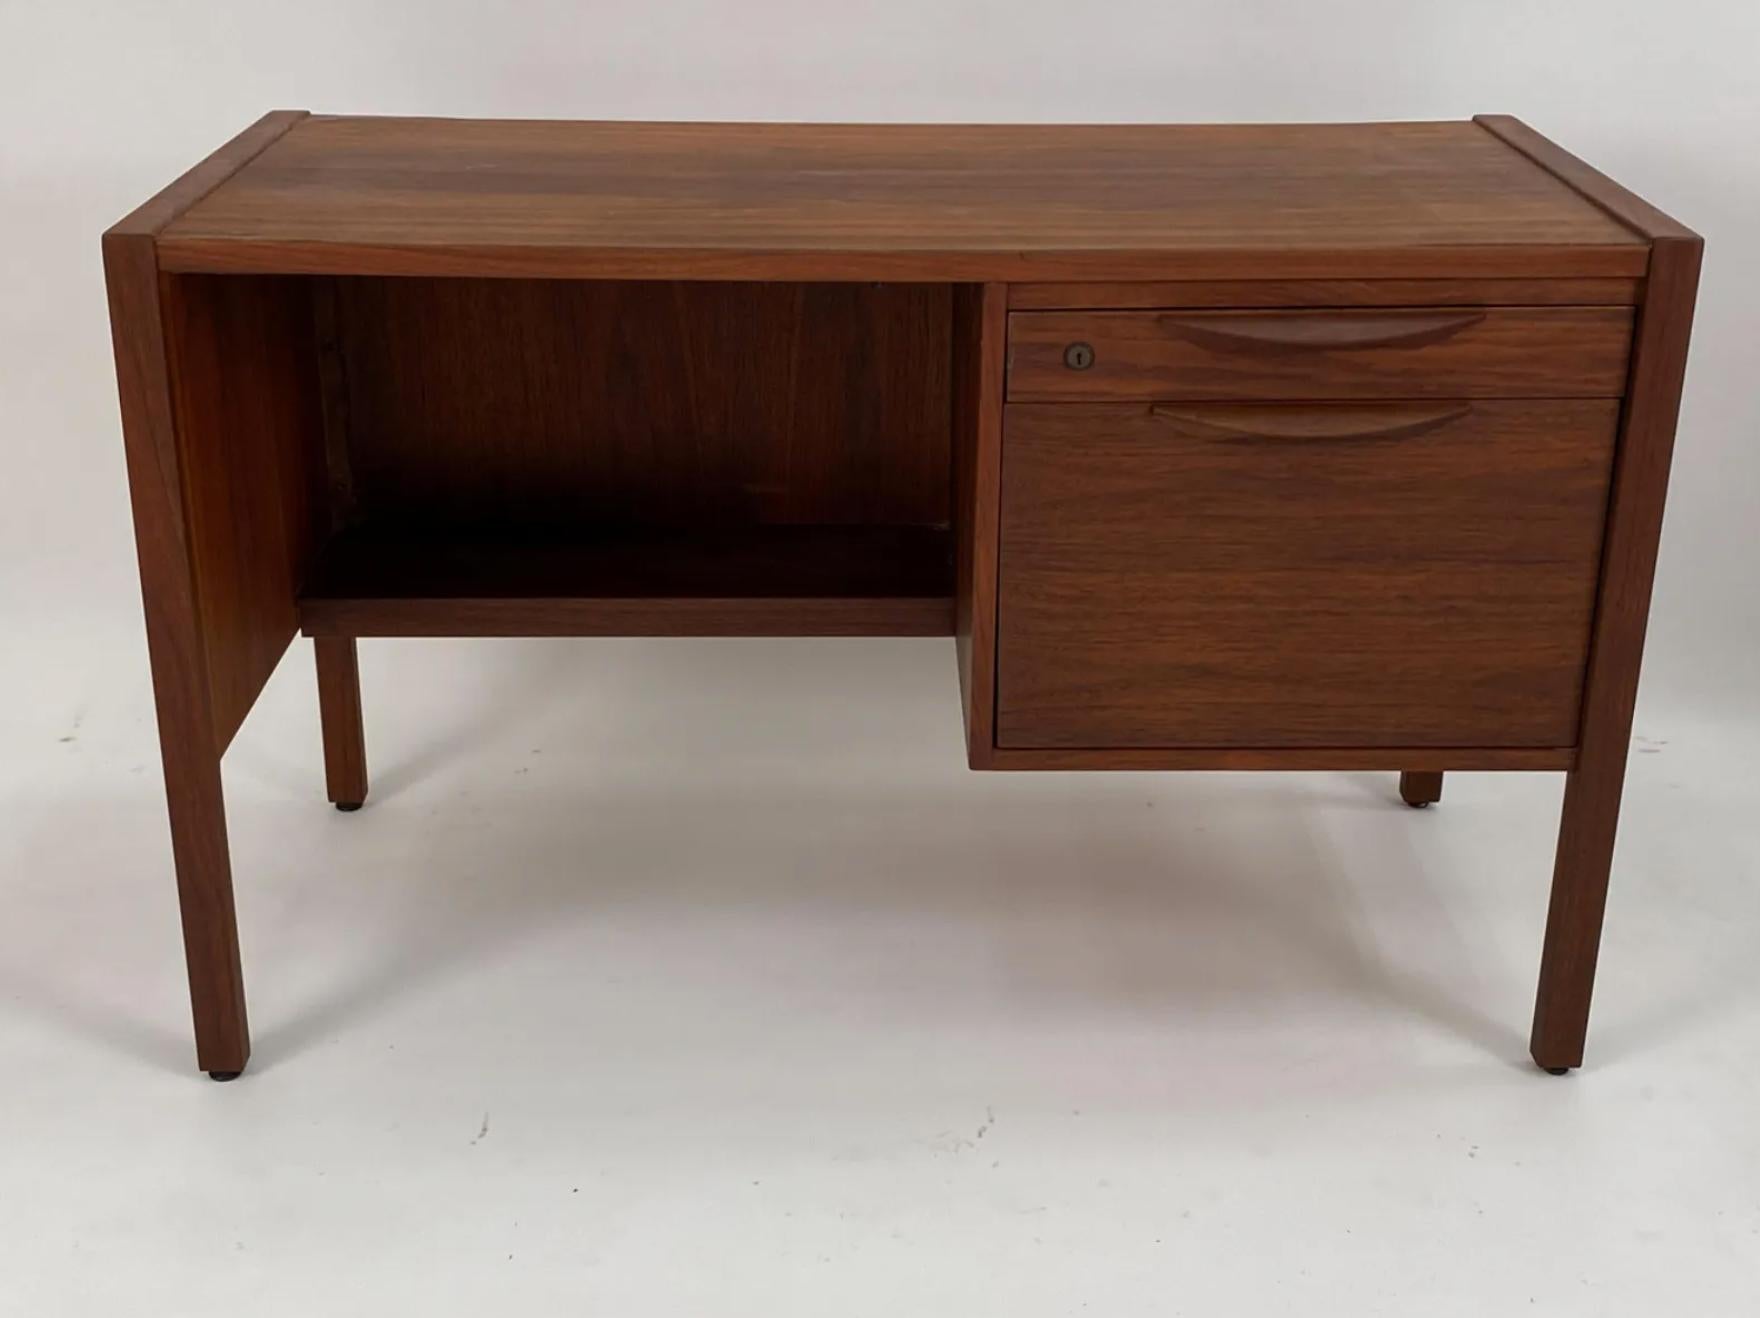 Jens Risom (Danish American,1916-2016) Mid-Century Modern walnut writing desk. Features 2 drawers with beautiful walnut handles. Key included. 

Dimensions: H 28.5